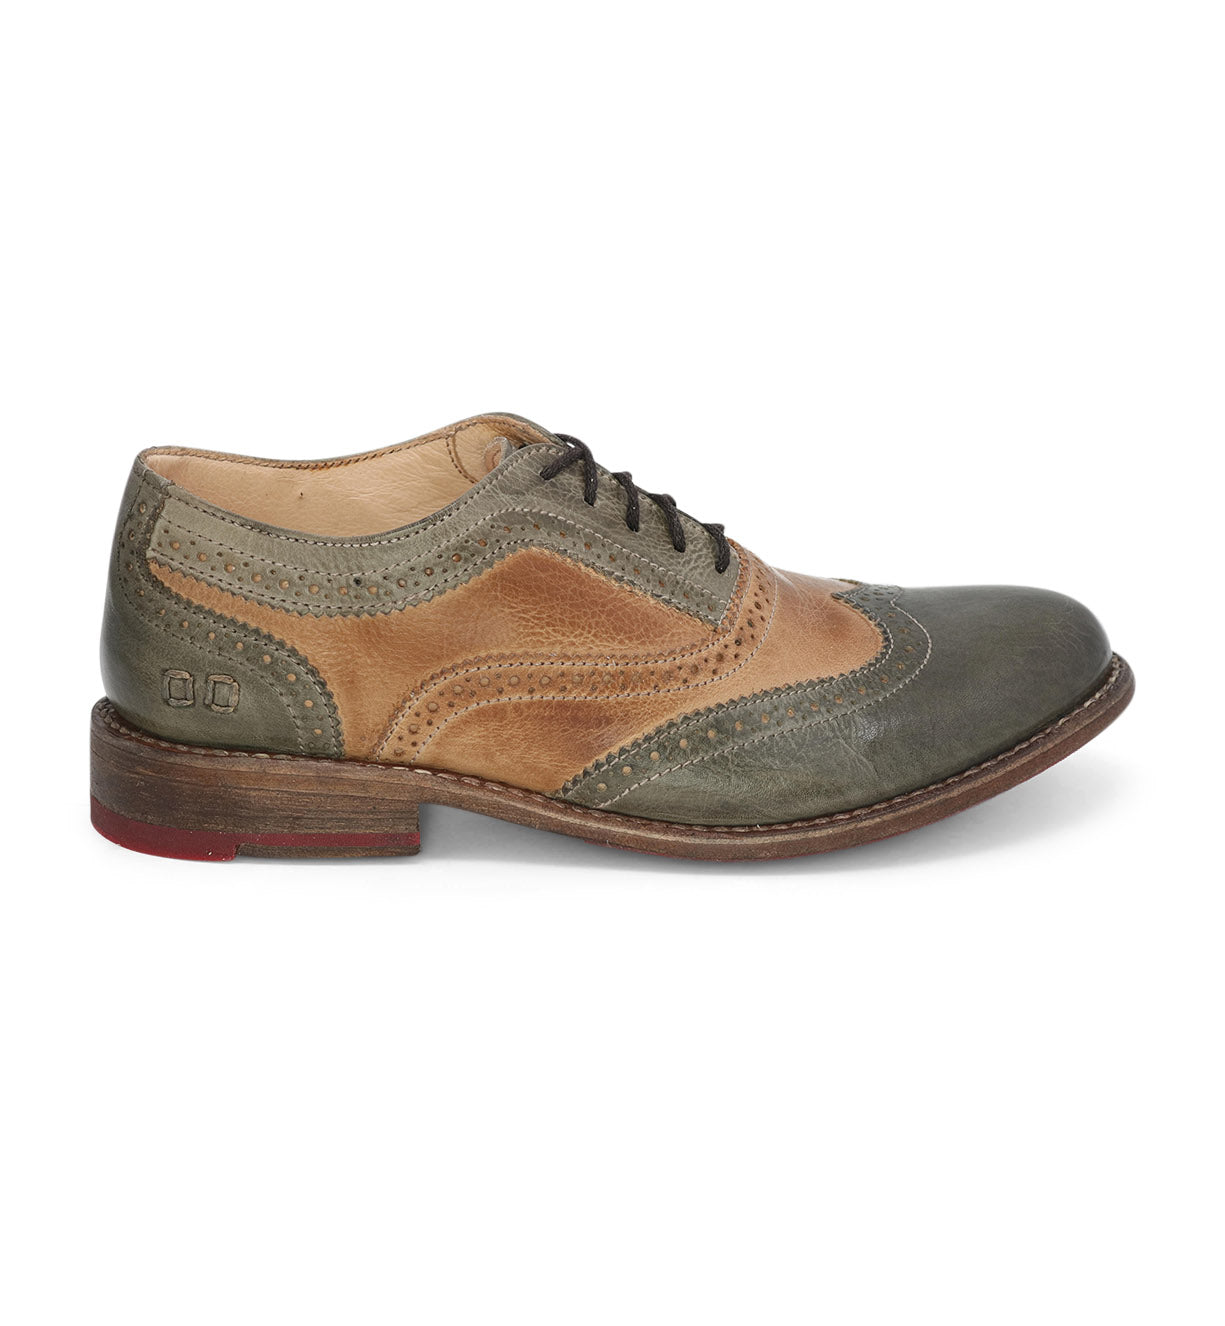 A green and tan wingtip oxford shoe called the Lita by Bed Stu.